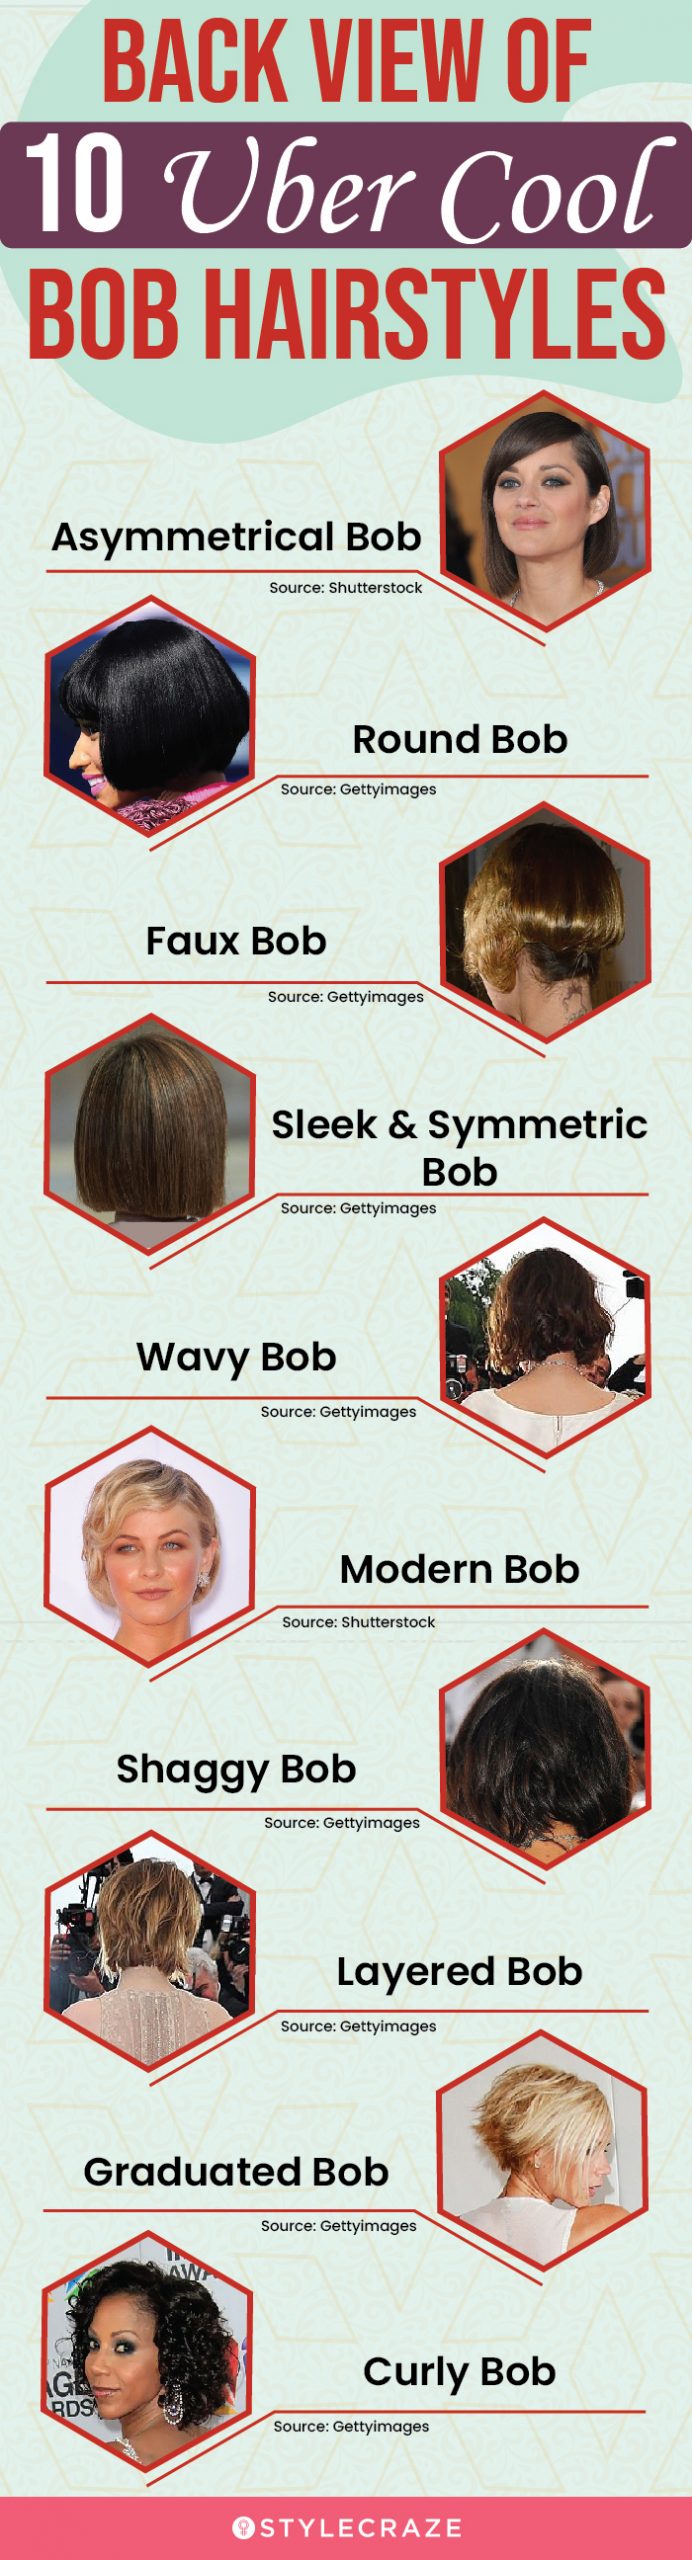 back view of 10 uber cool bob hairstyles (infographic)